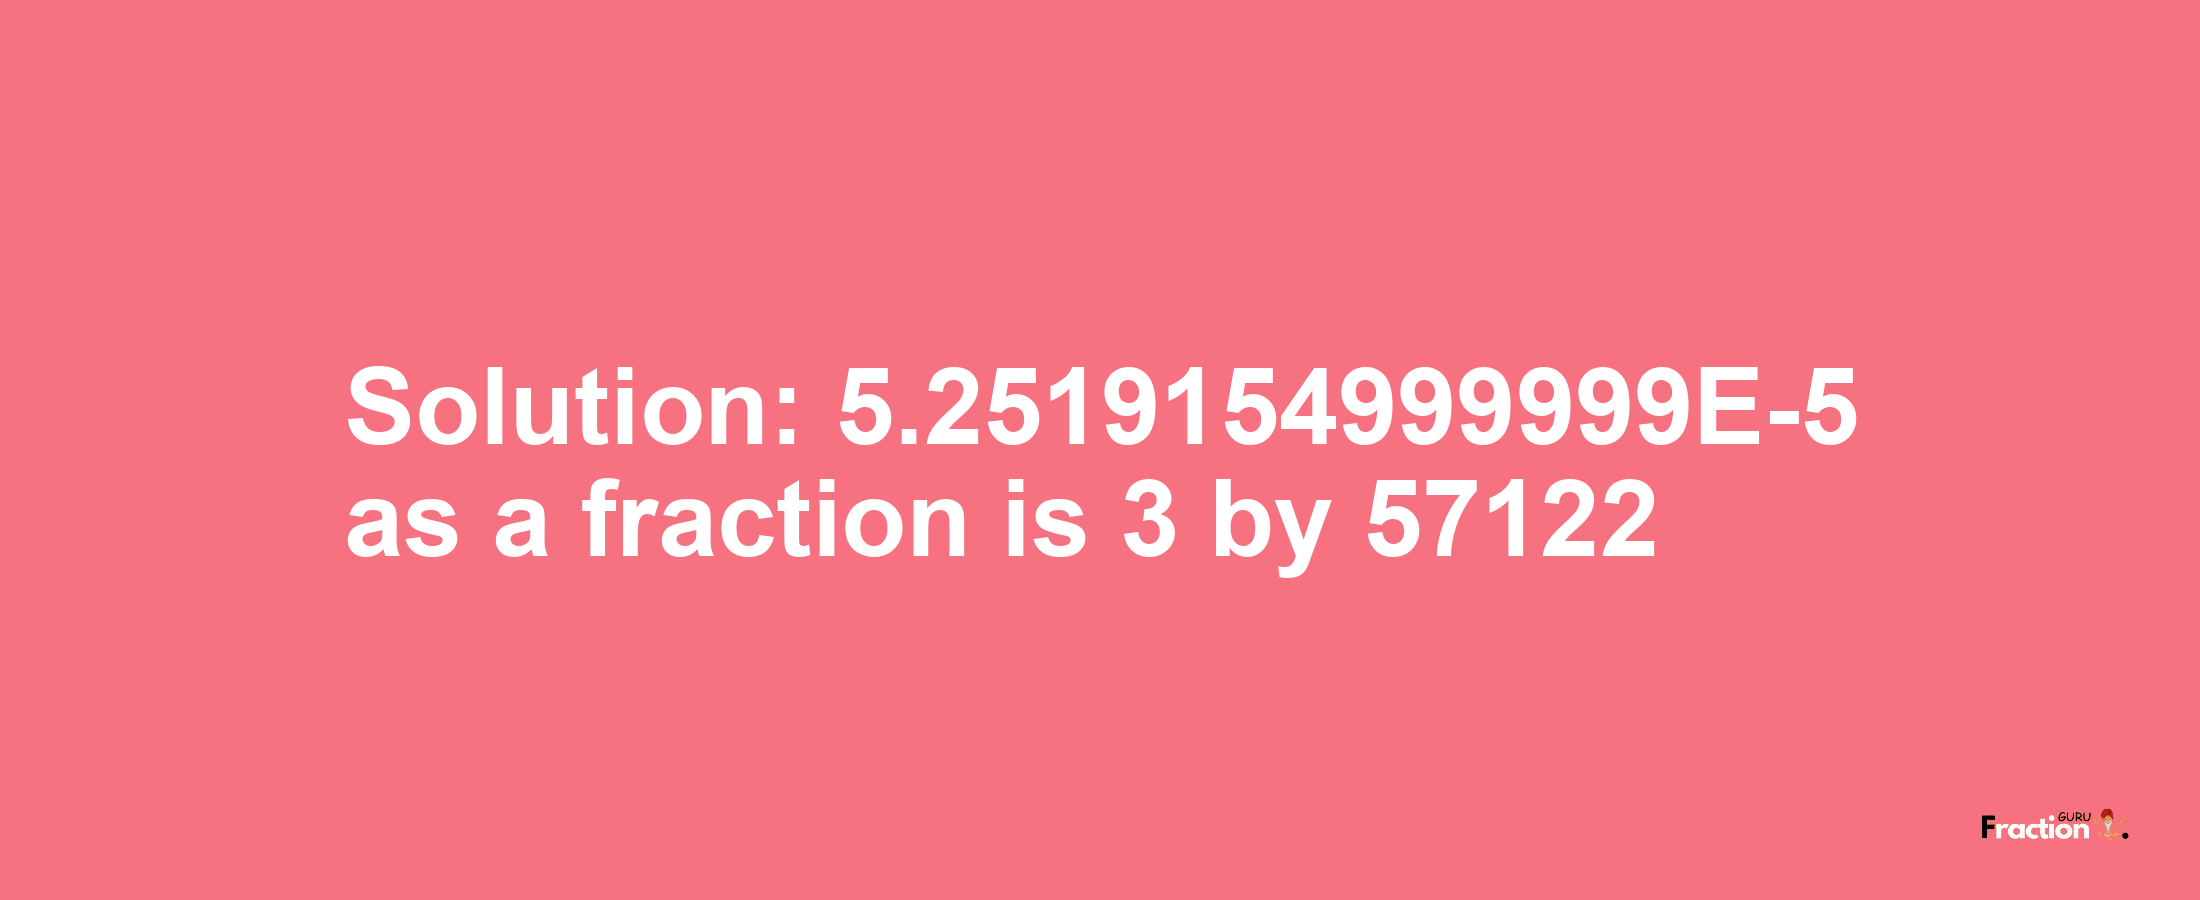 Solution:5.2519154999999E-5 as a fraction is 3/57122